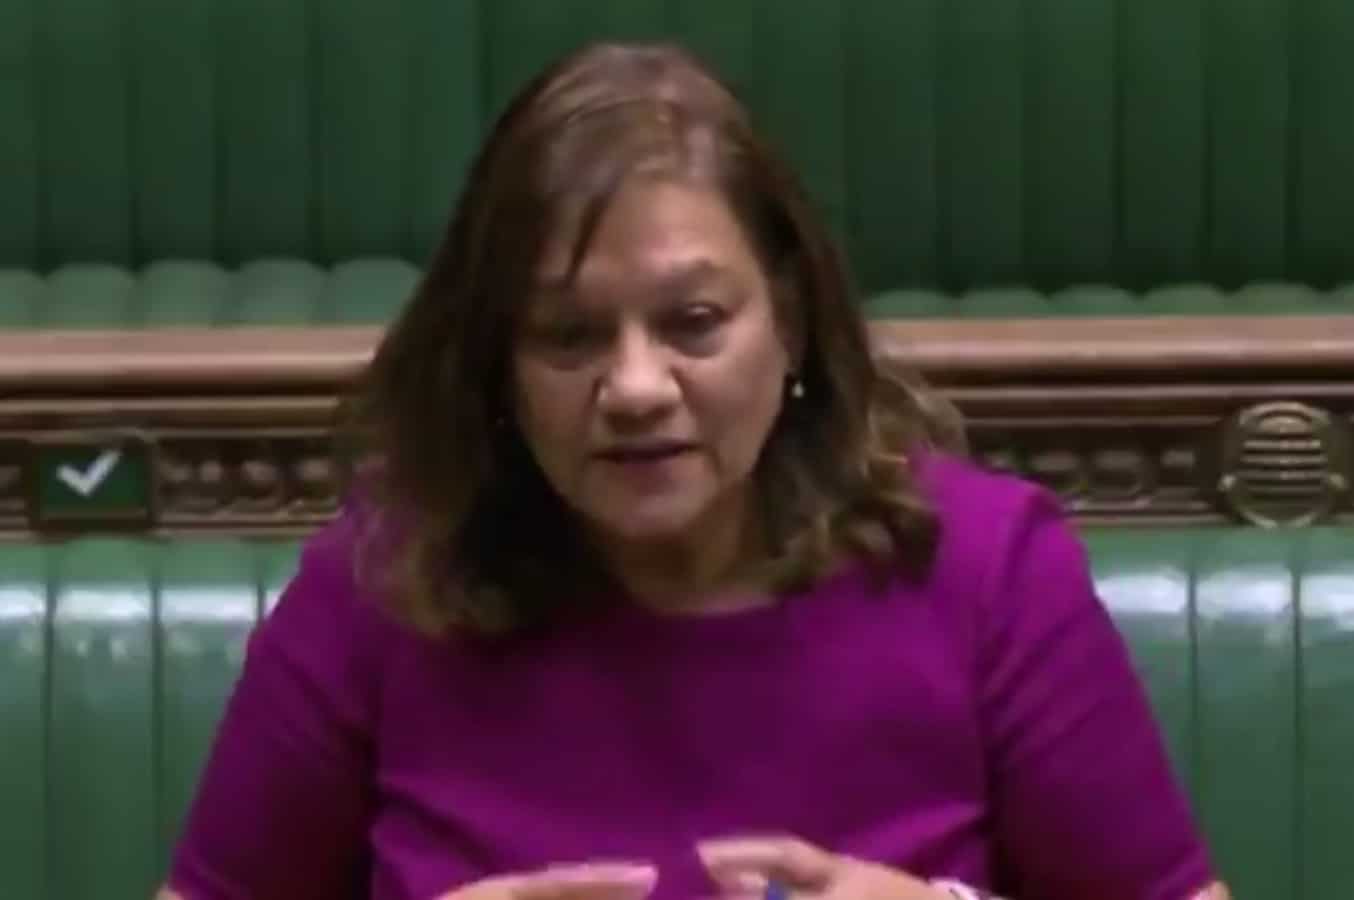 Valerie Vaz questions Rees-Mogg on “My Little Crony” map in parliament